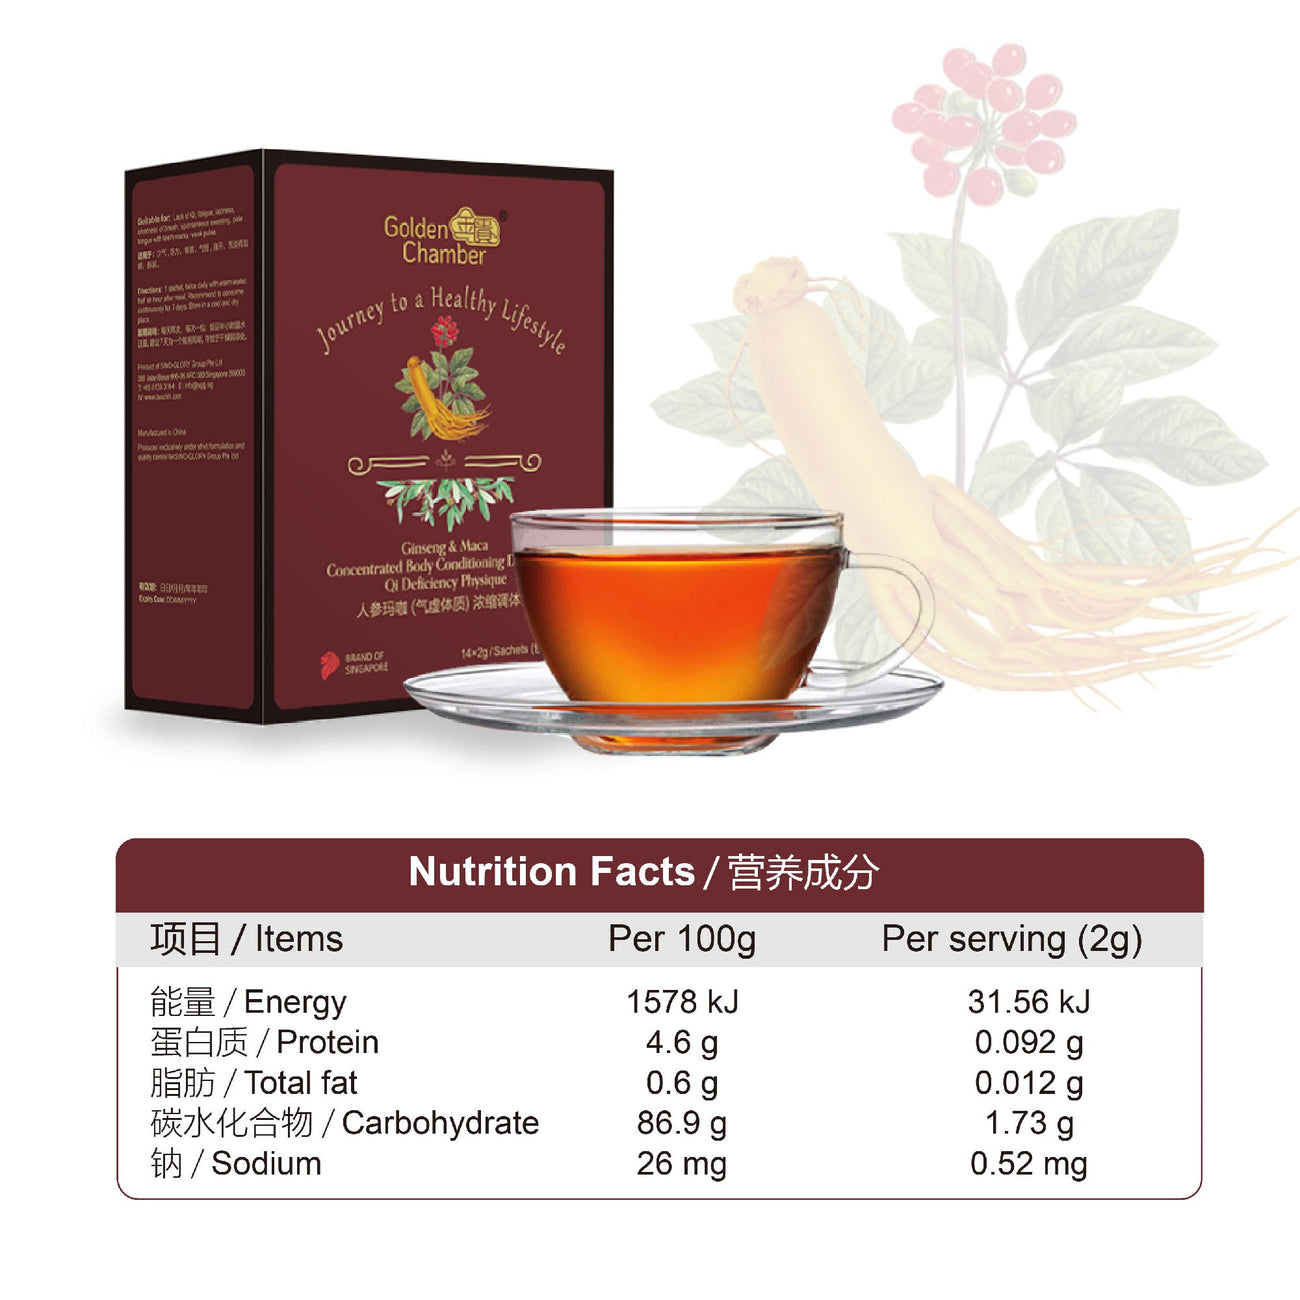 Golden Chamber Ginseng & Maca Concentrated Body Conditioning Drink for Qi Deficiency Physique 人参玛咖气虚体质浓缩调体饮